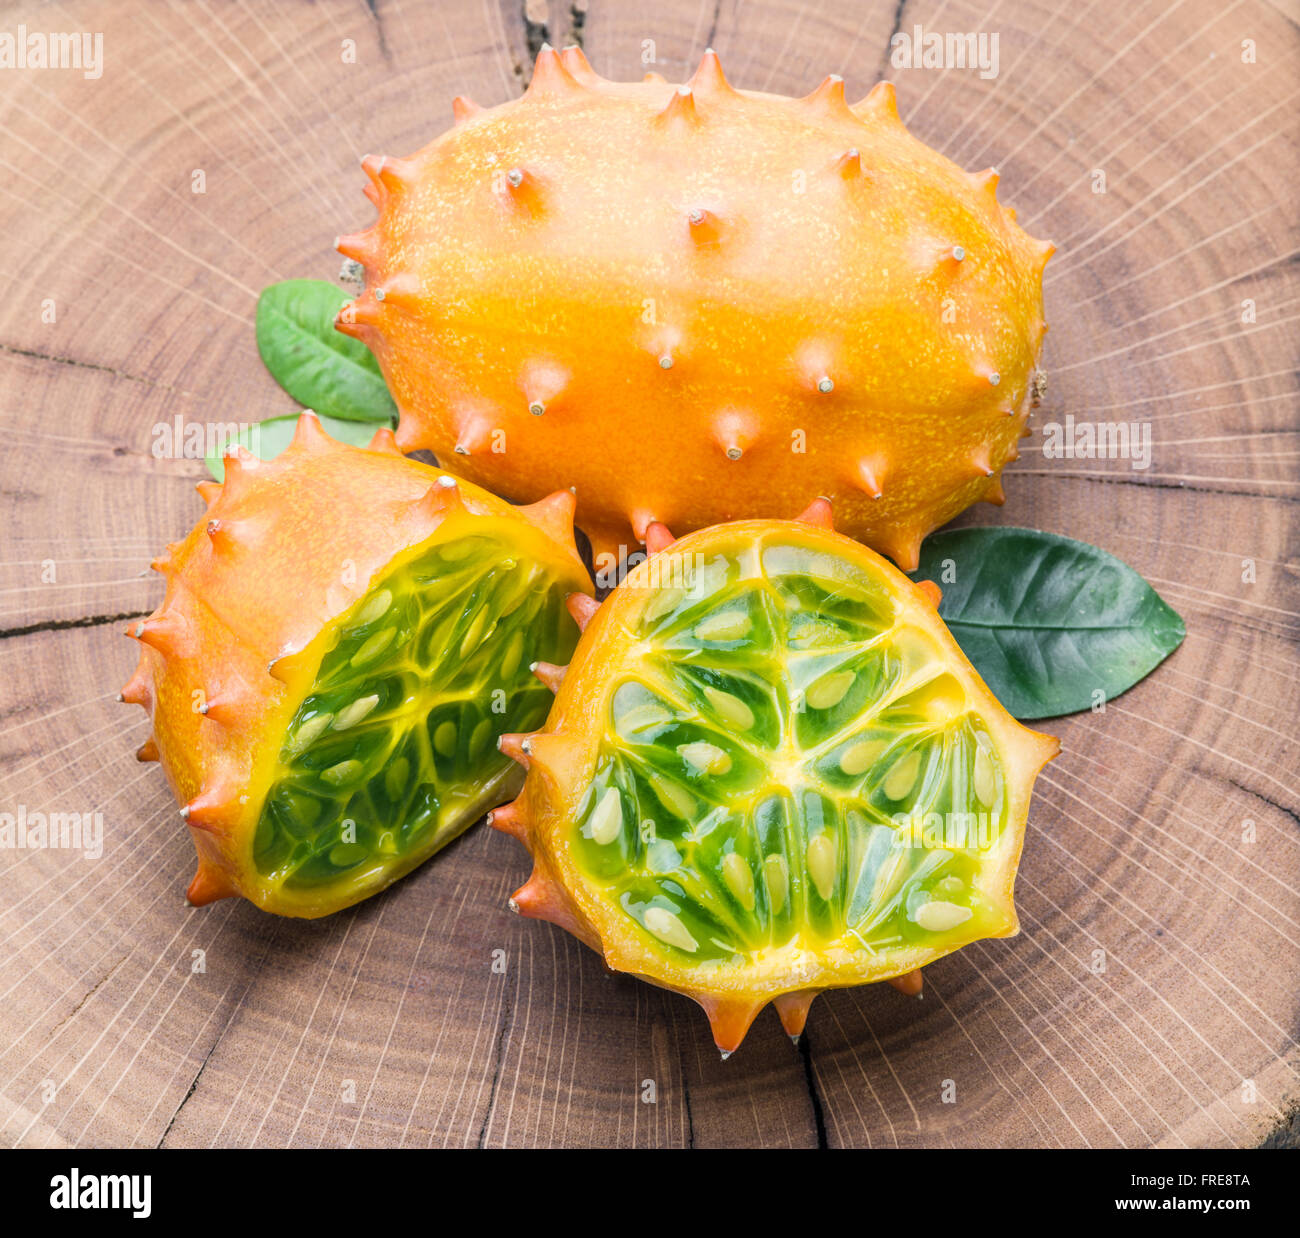 Kiwano fruits on the wooden table. Stock Photo